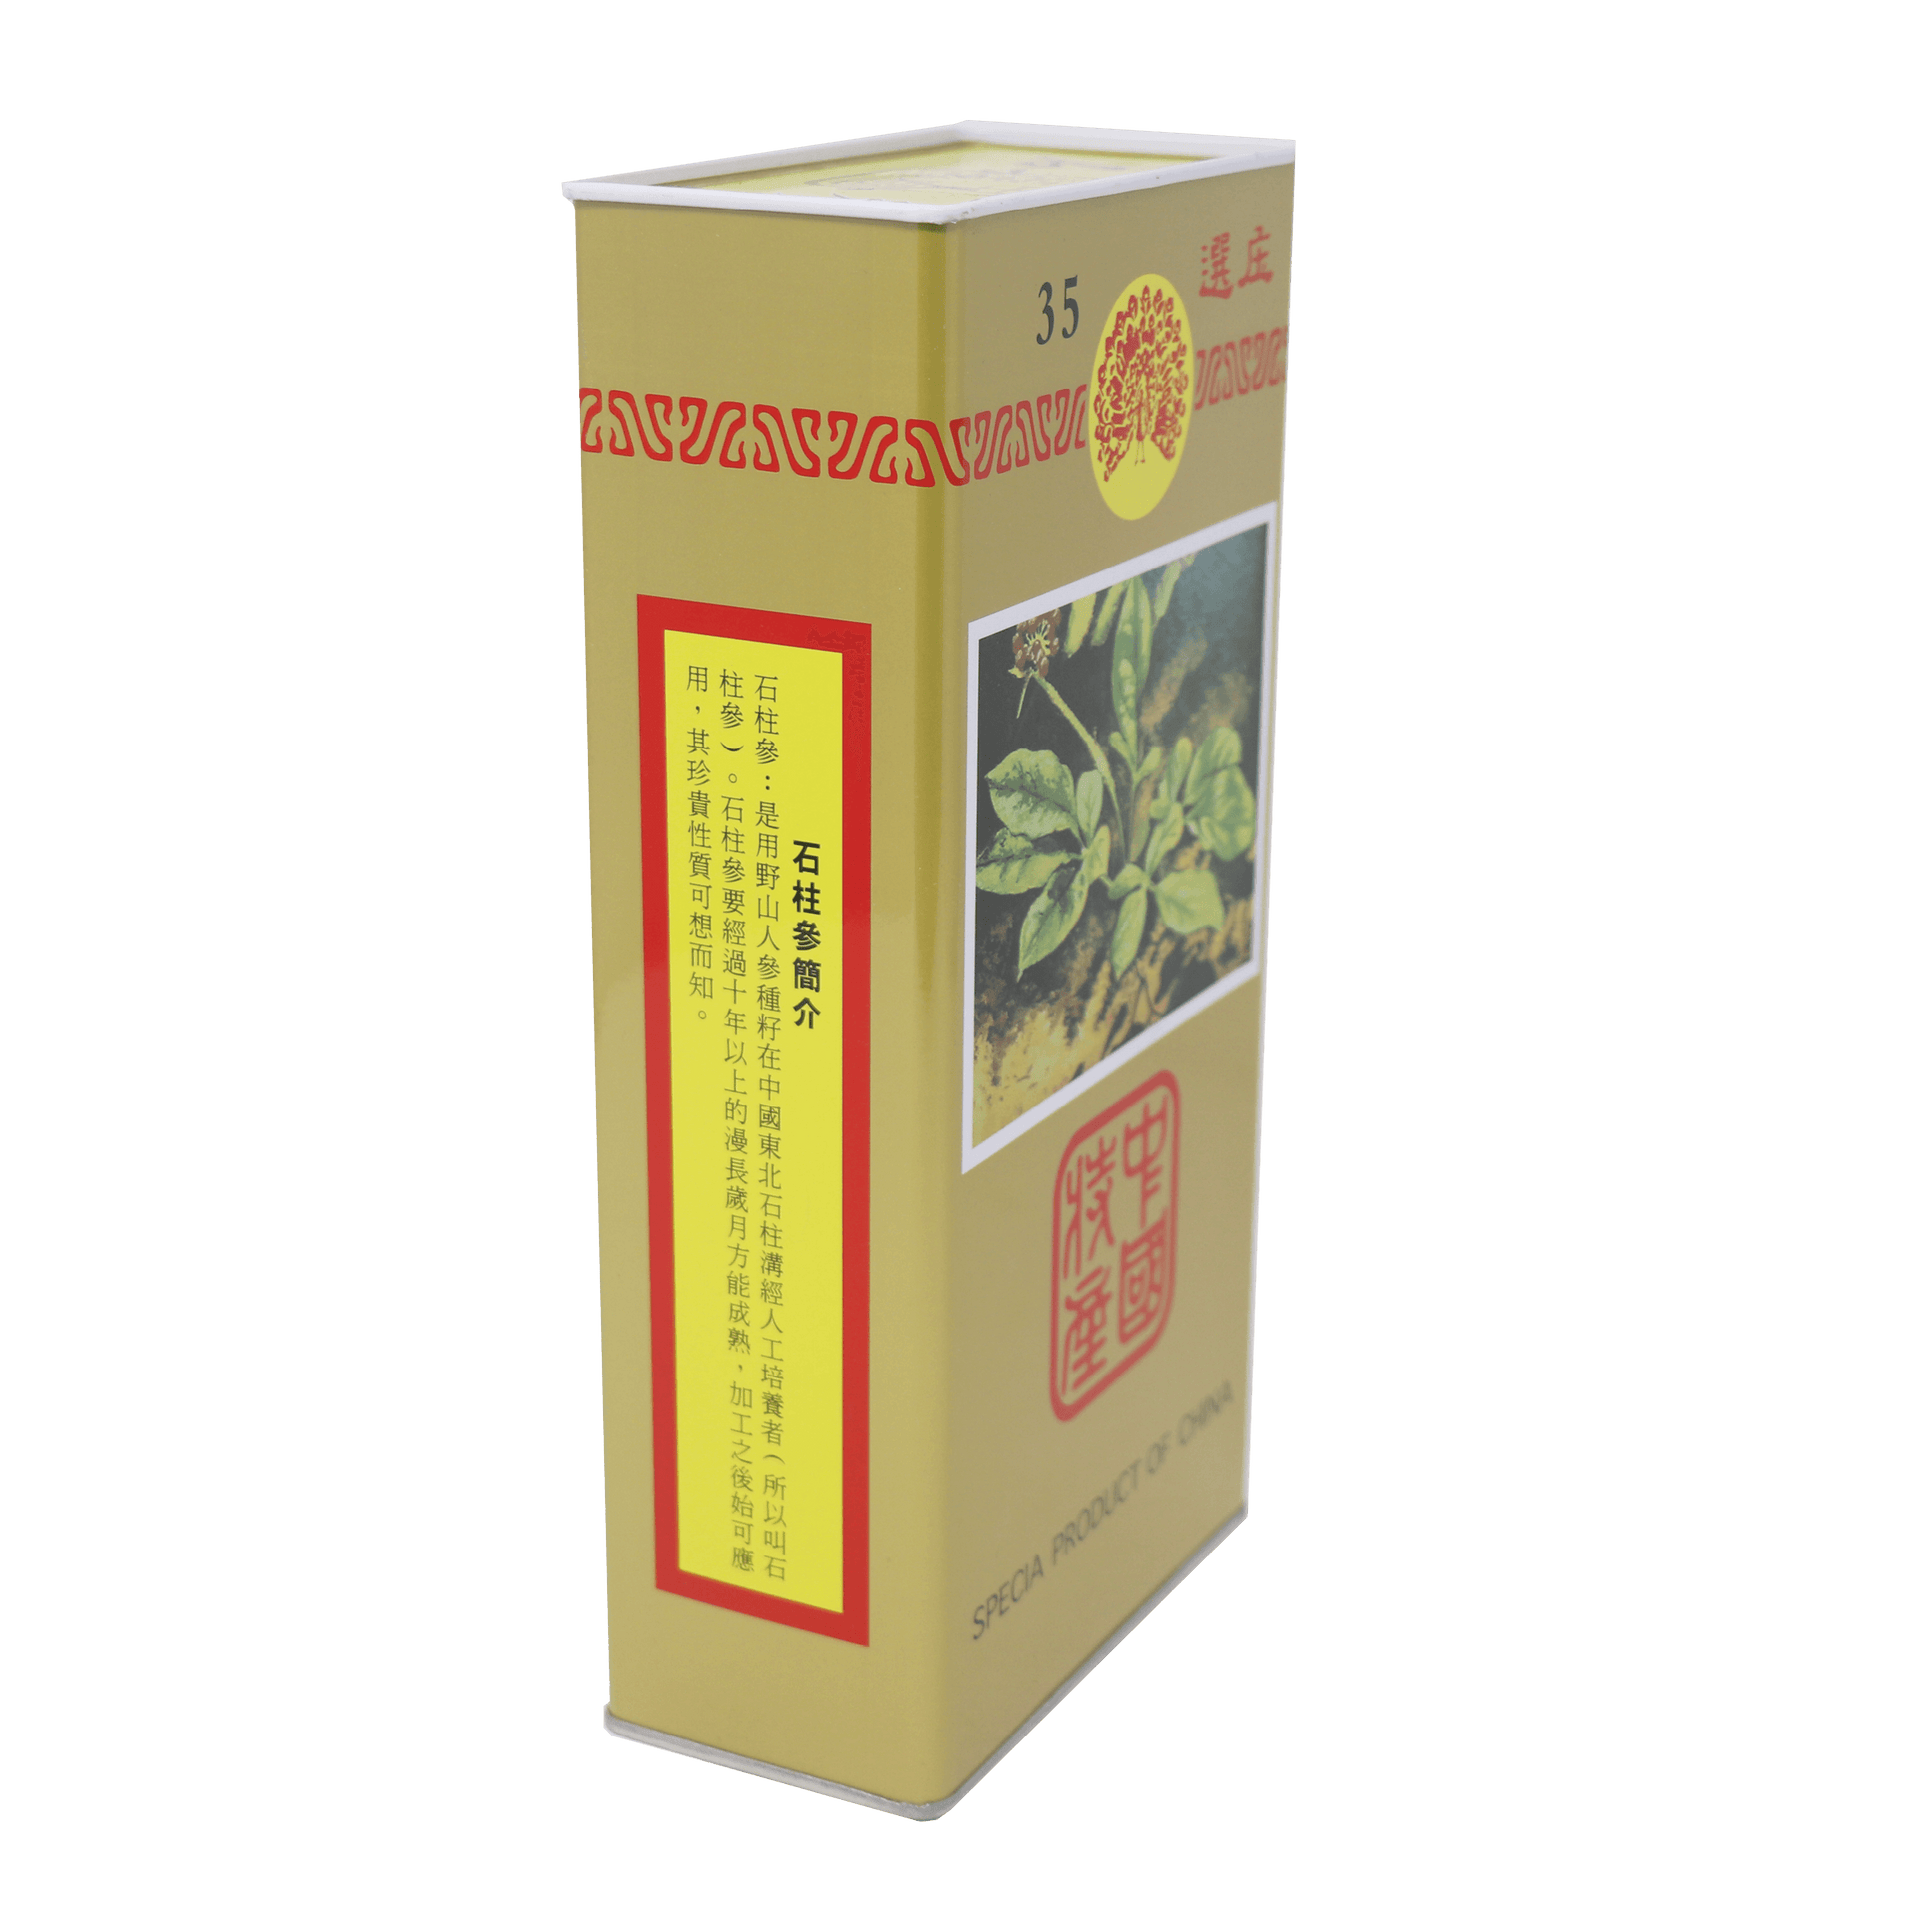 SHIH CHU Chinese GINSENG Small Size (35pieces/600g) - Buy at New Green Nutrition